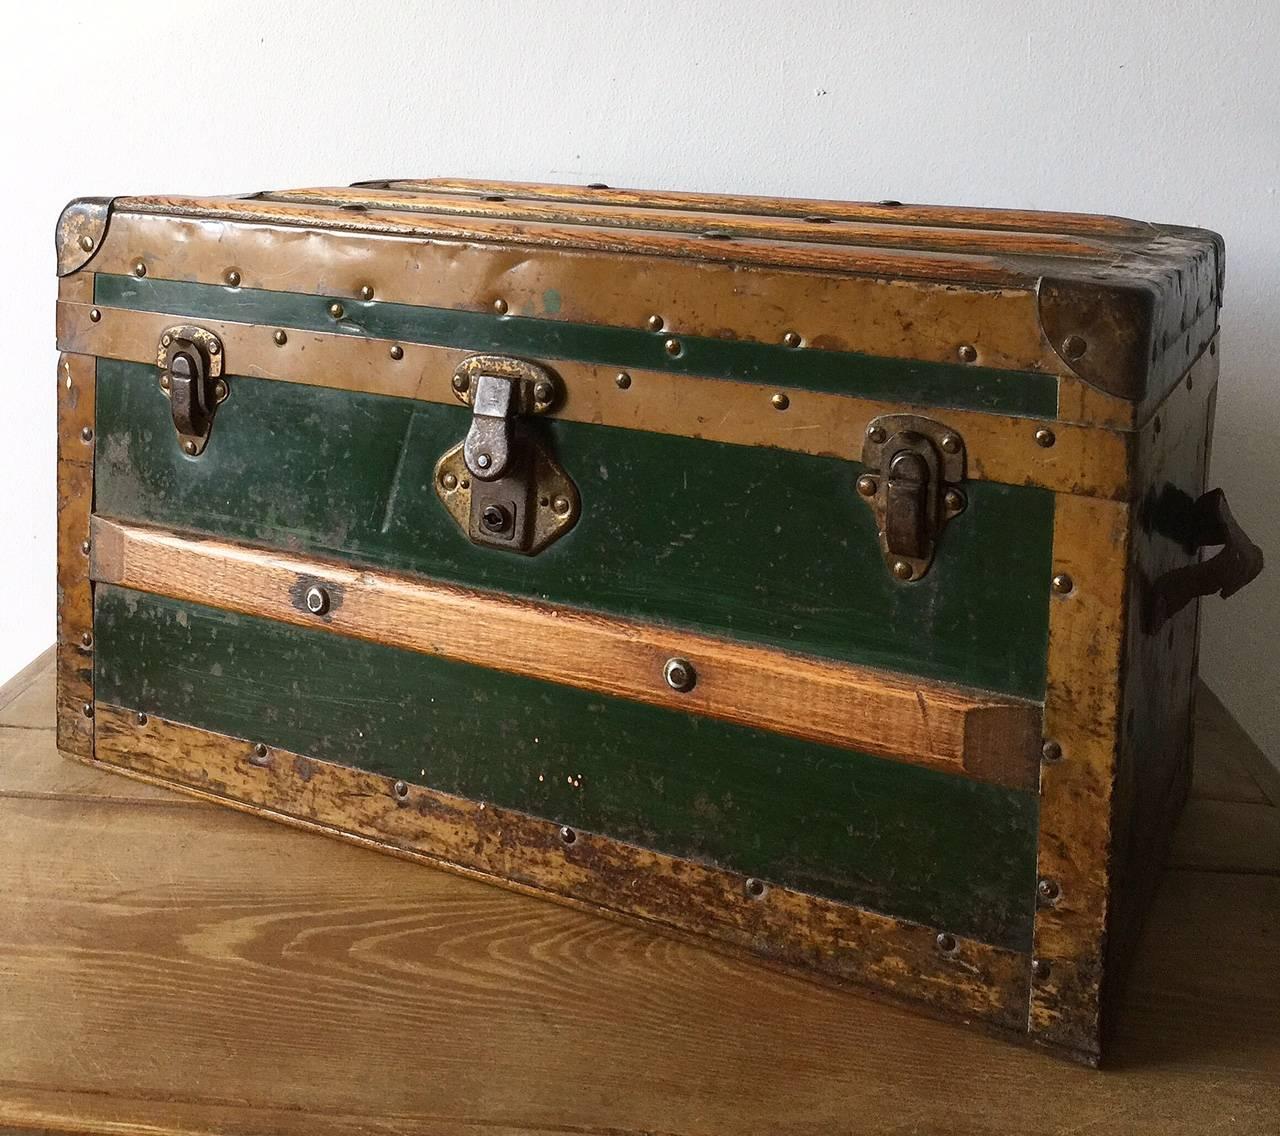 Fabulous antique miniature size traveling steamer trunk with hardwood strapping and a metal outer construction. Please note one of the leather handles is split but could easily be repaired.